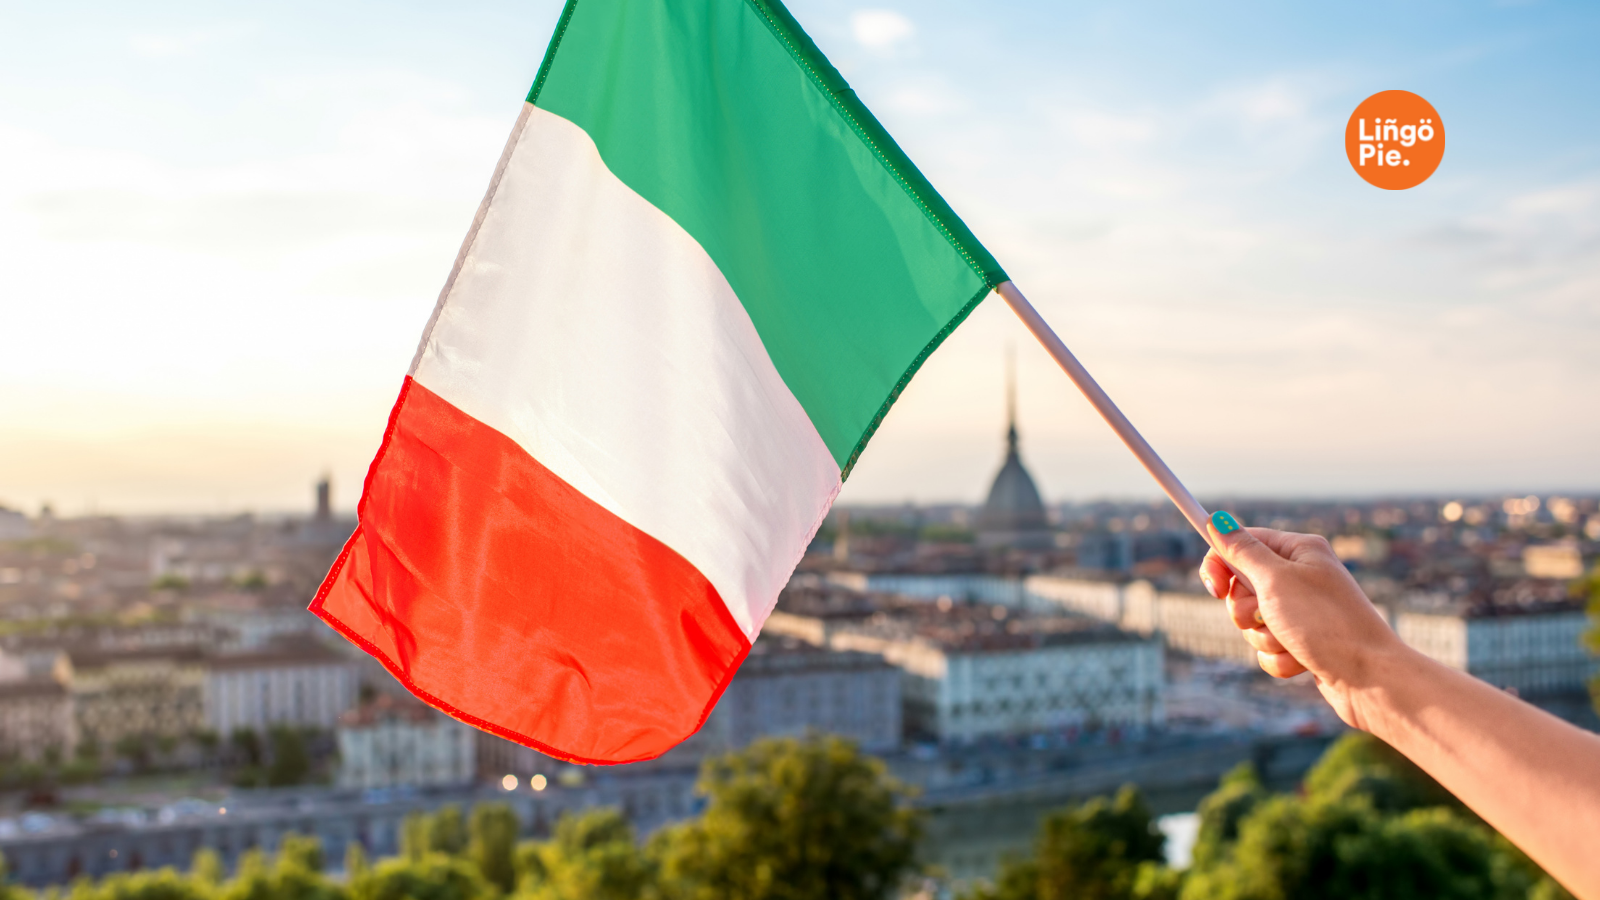 What Is the Best Way To Learn Italian on Your Own?